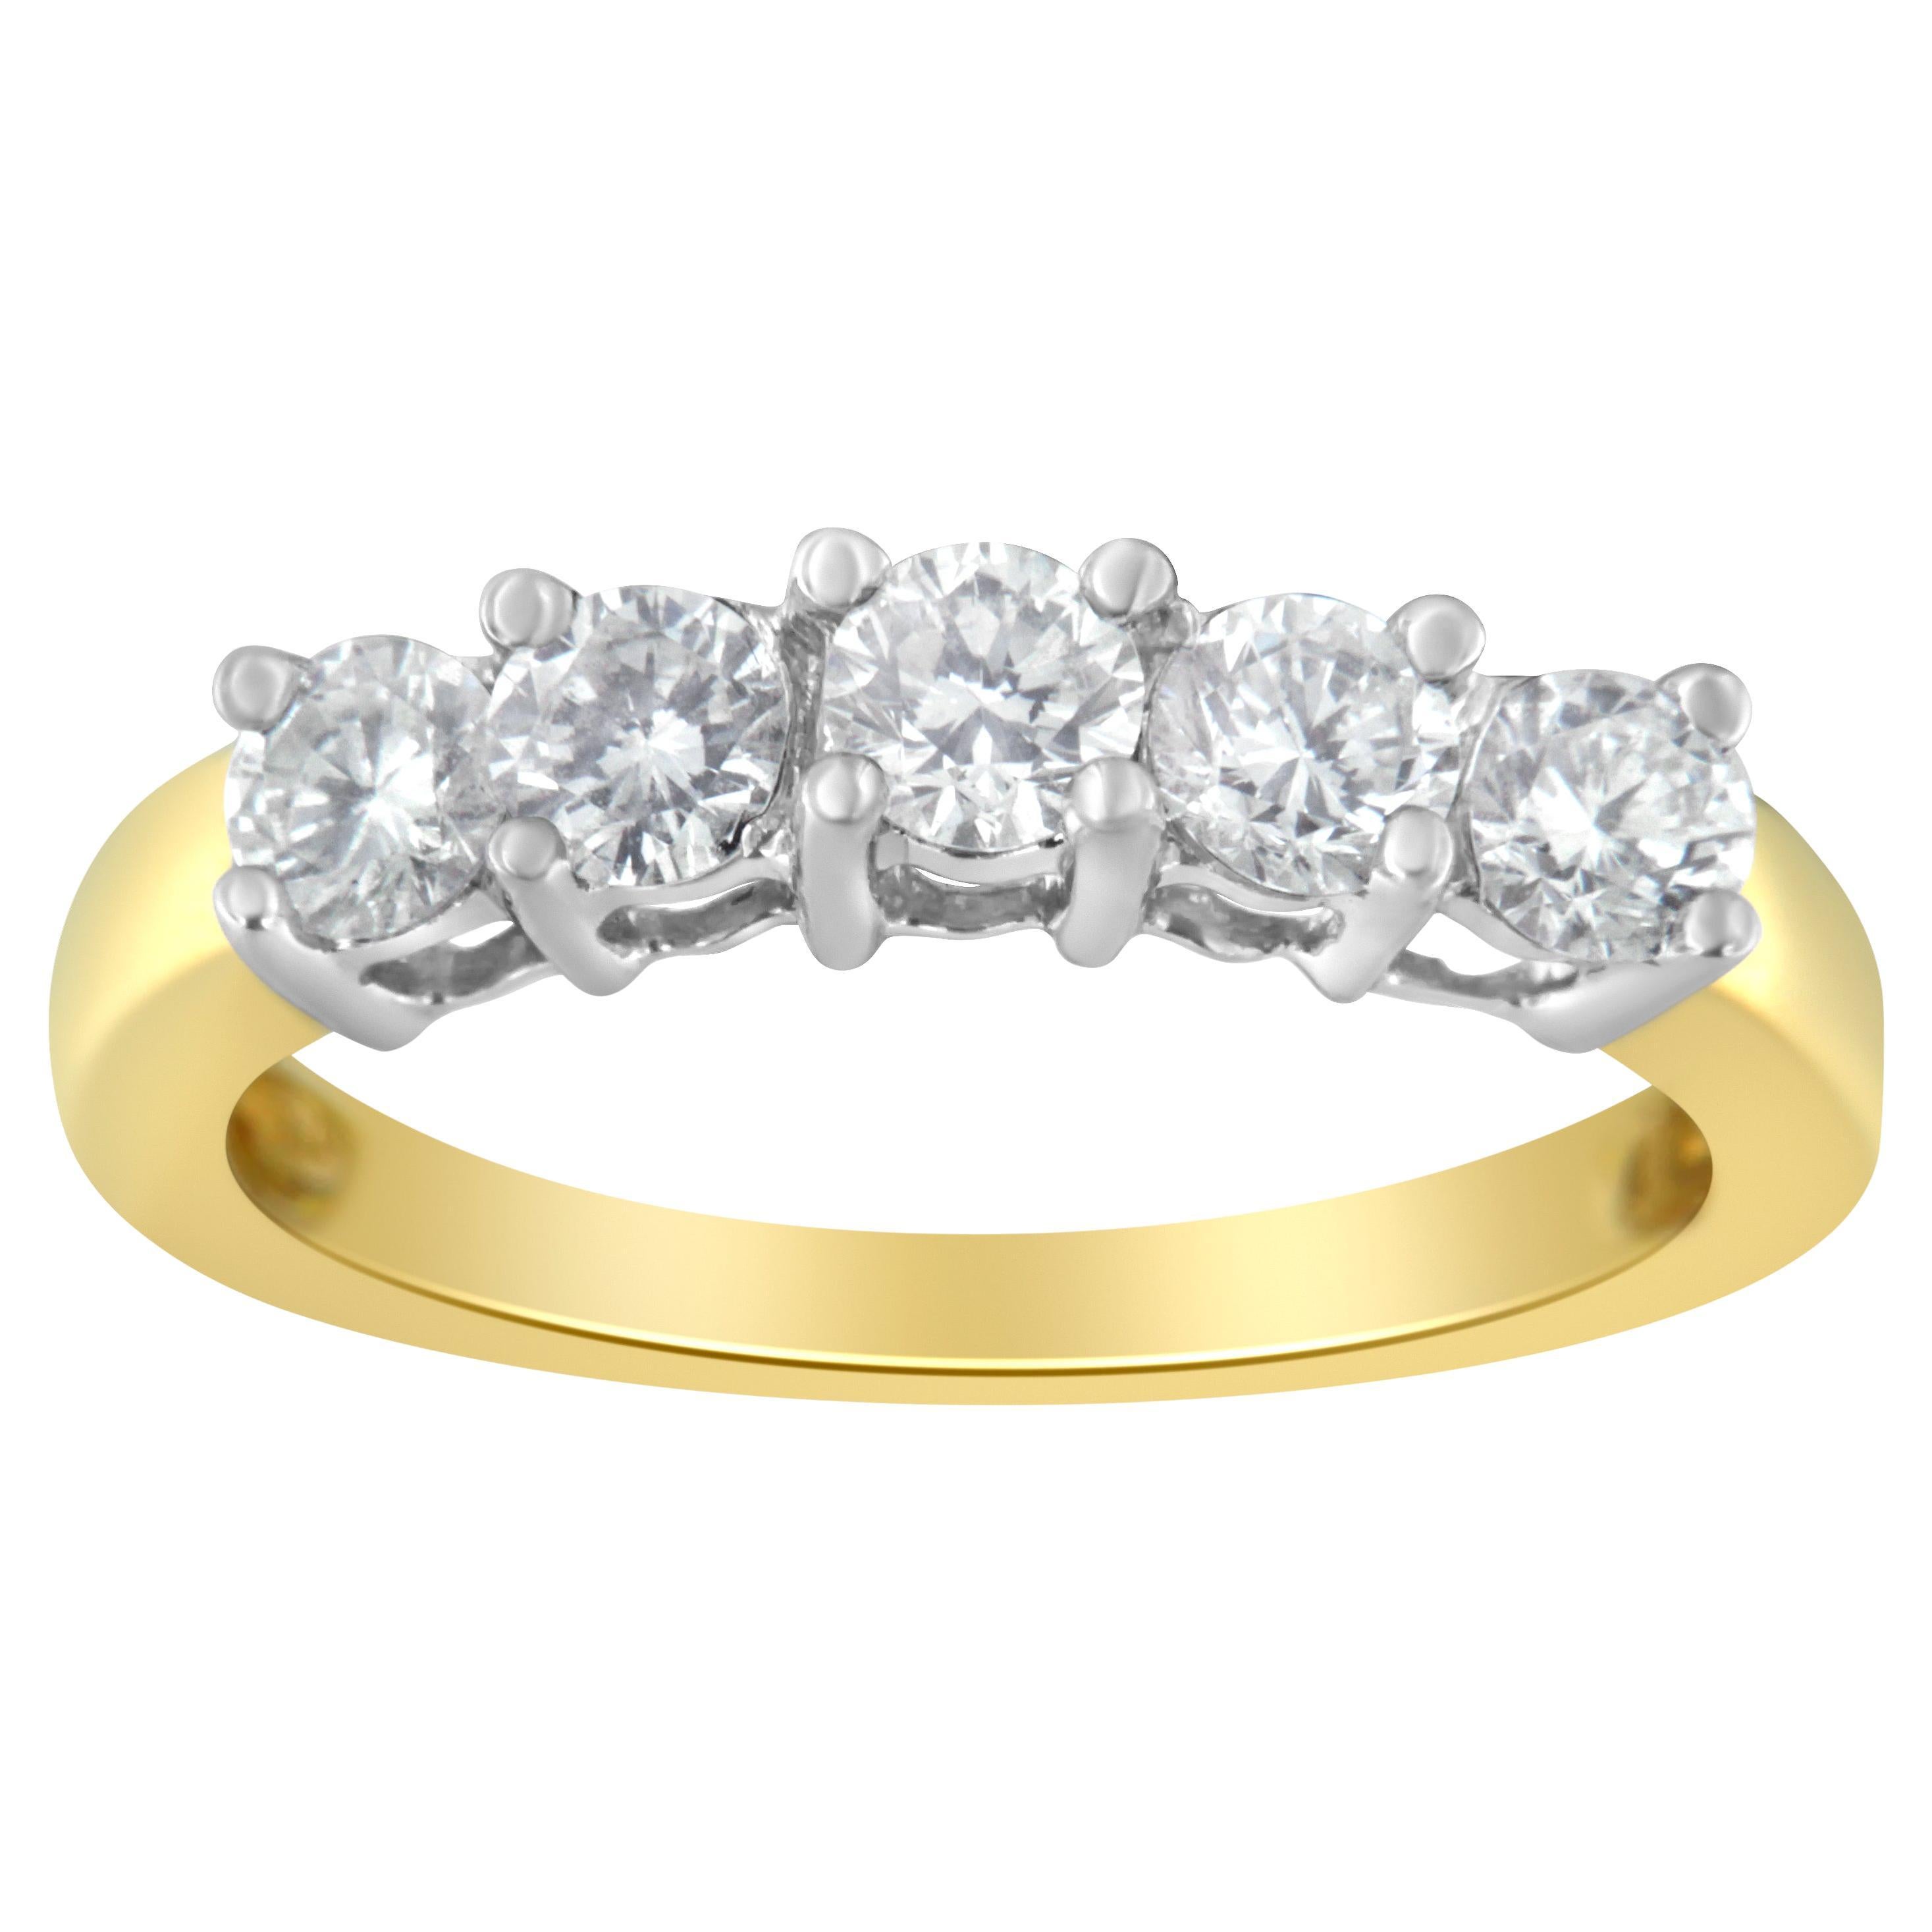 14K Two Toned Gold 1.0 Carat 5 Stone Diamond Ring For Sale